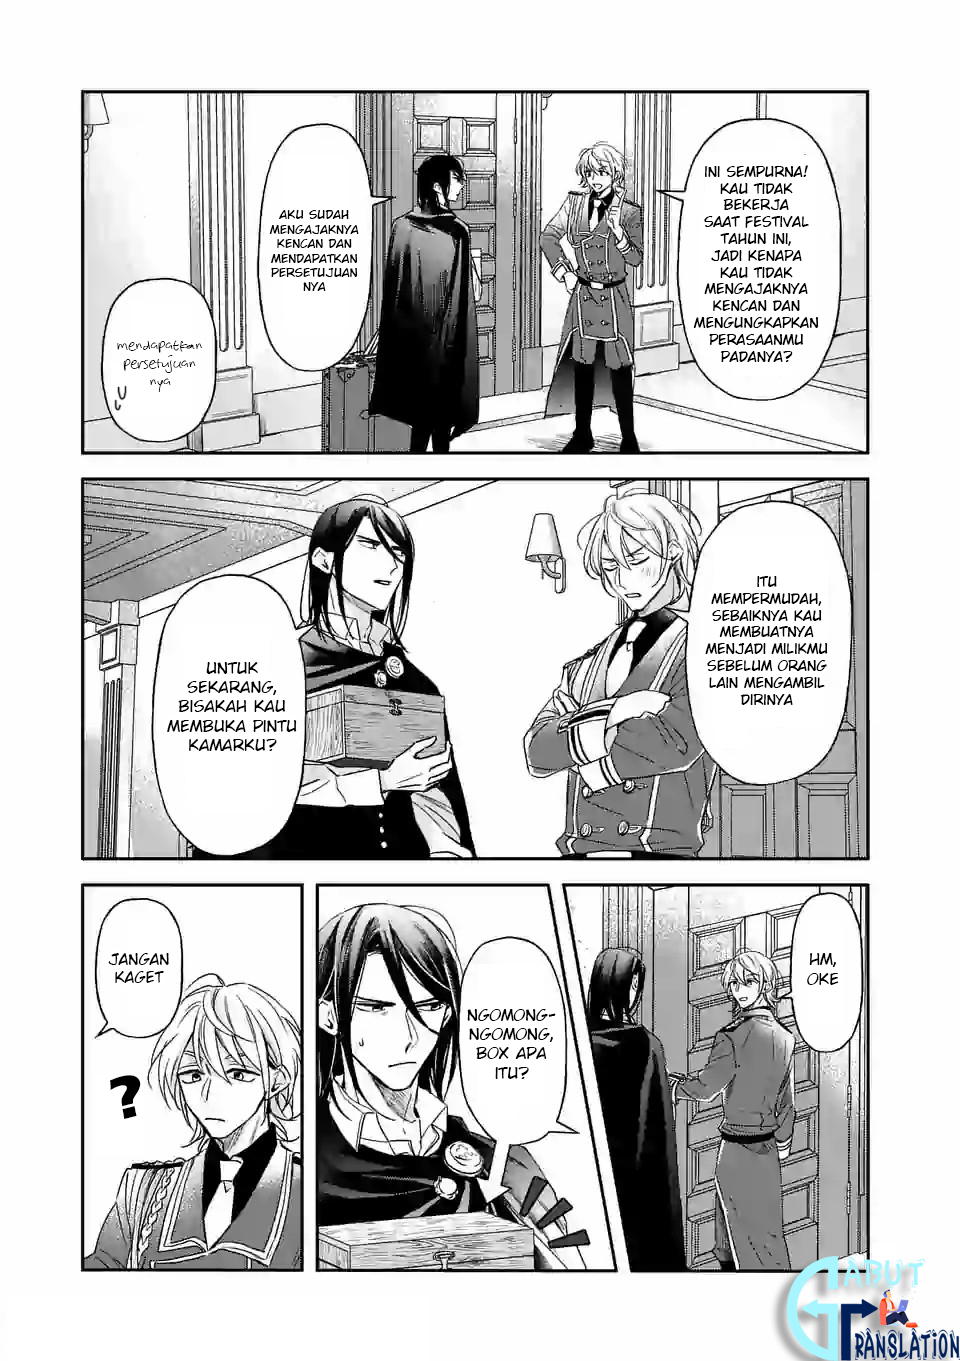 The Savior’s Book Café in Another World Chapter 10